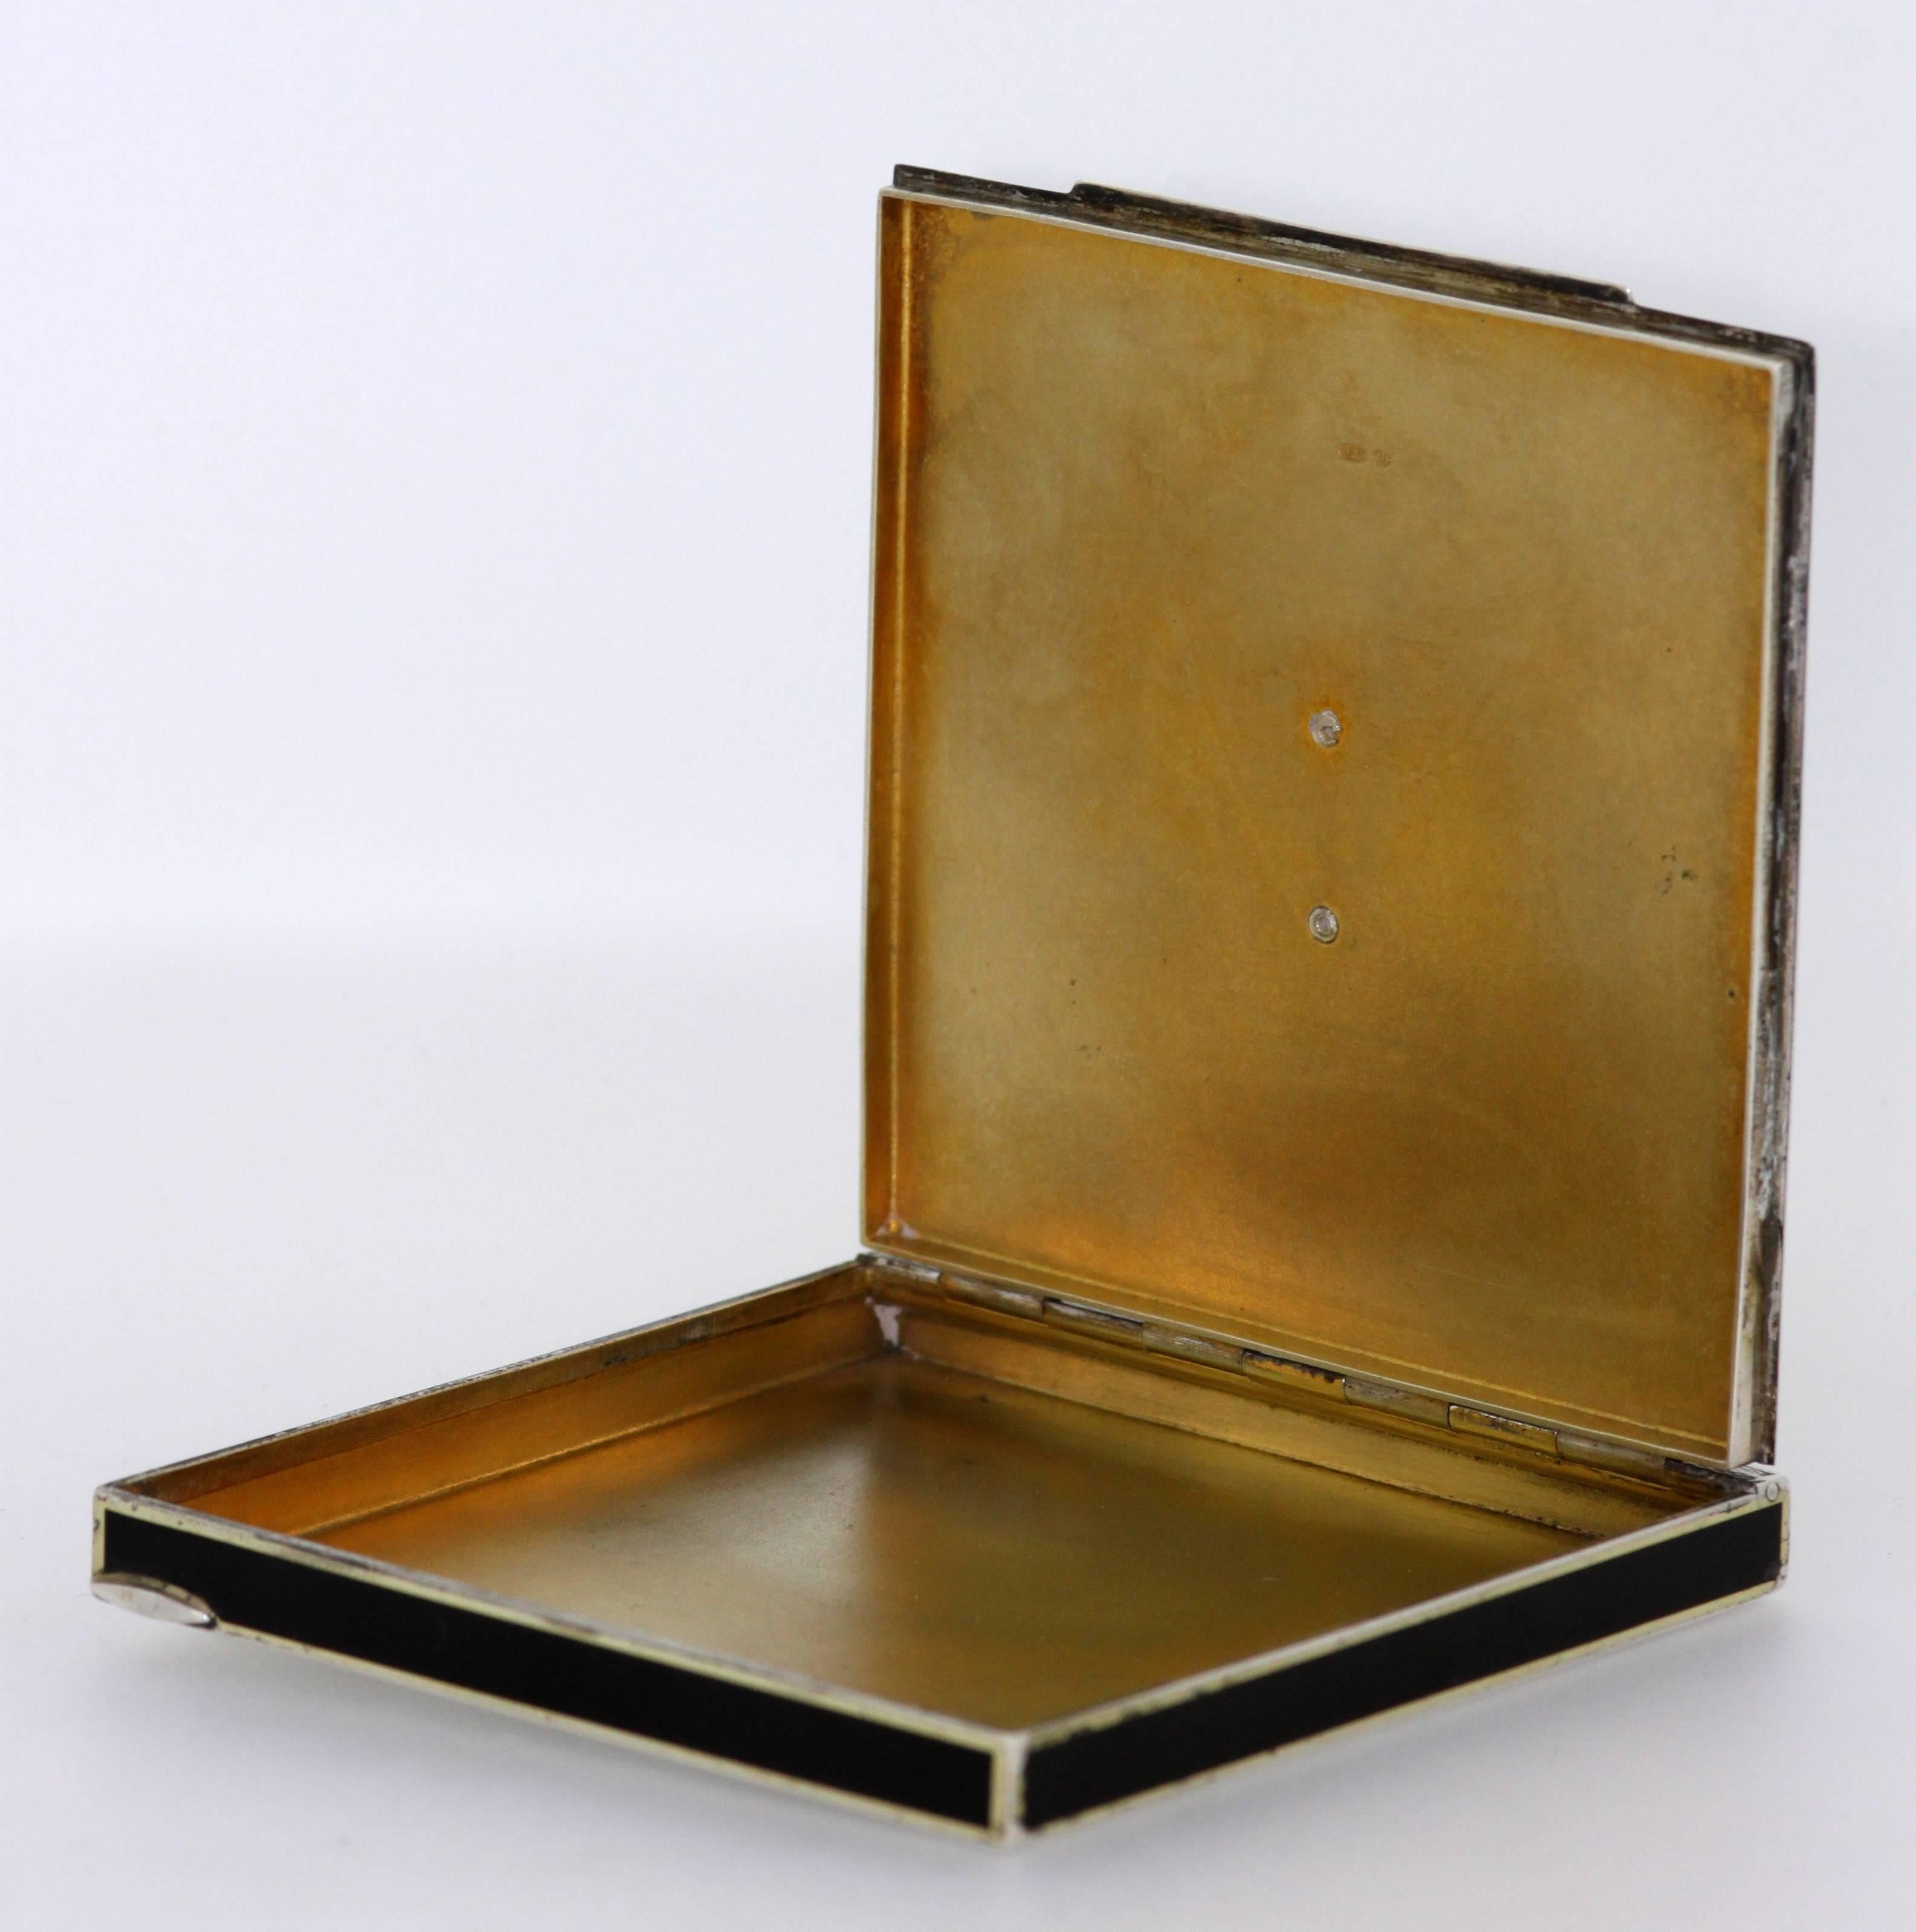 Art Deco sterling silver and enamel cigarette box
Maker: AJ
London Import 1934
Fully hallmarked

Dimensions: 
Size: 8.3 x 8 x 0.8 cm
Gross weight: 92 grams total

Condition: Minor surface wear from general usage, enamel no damage, excellent